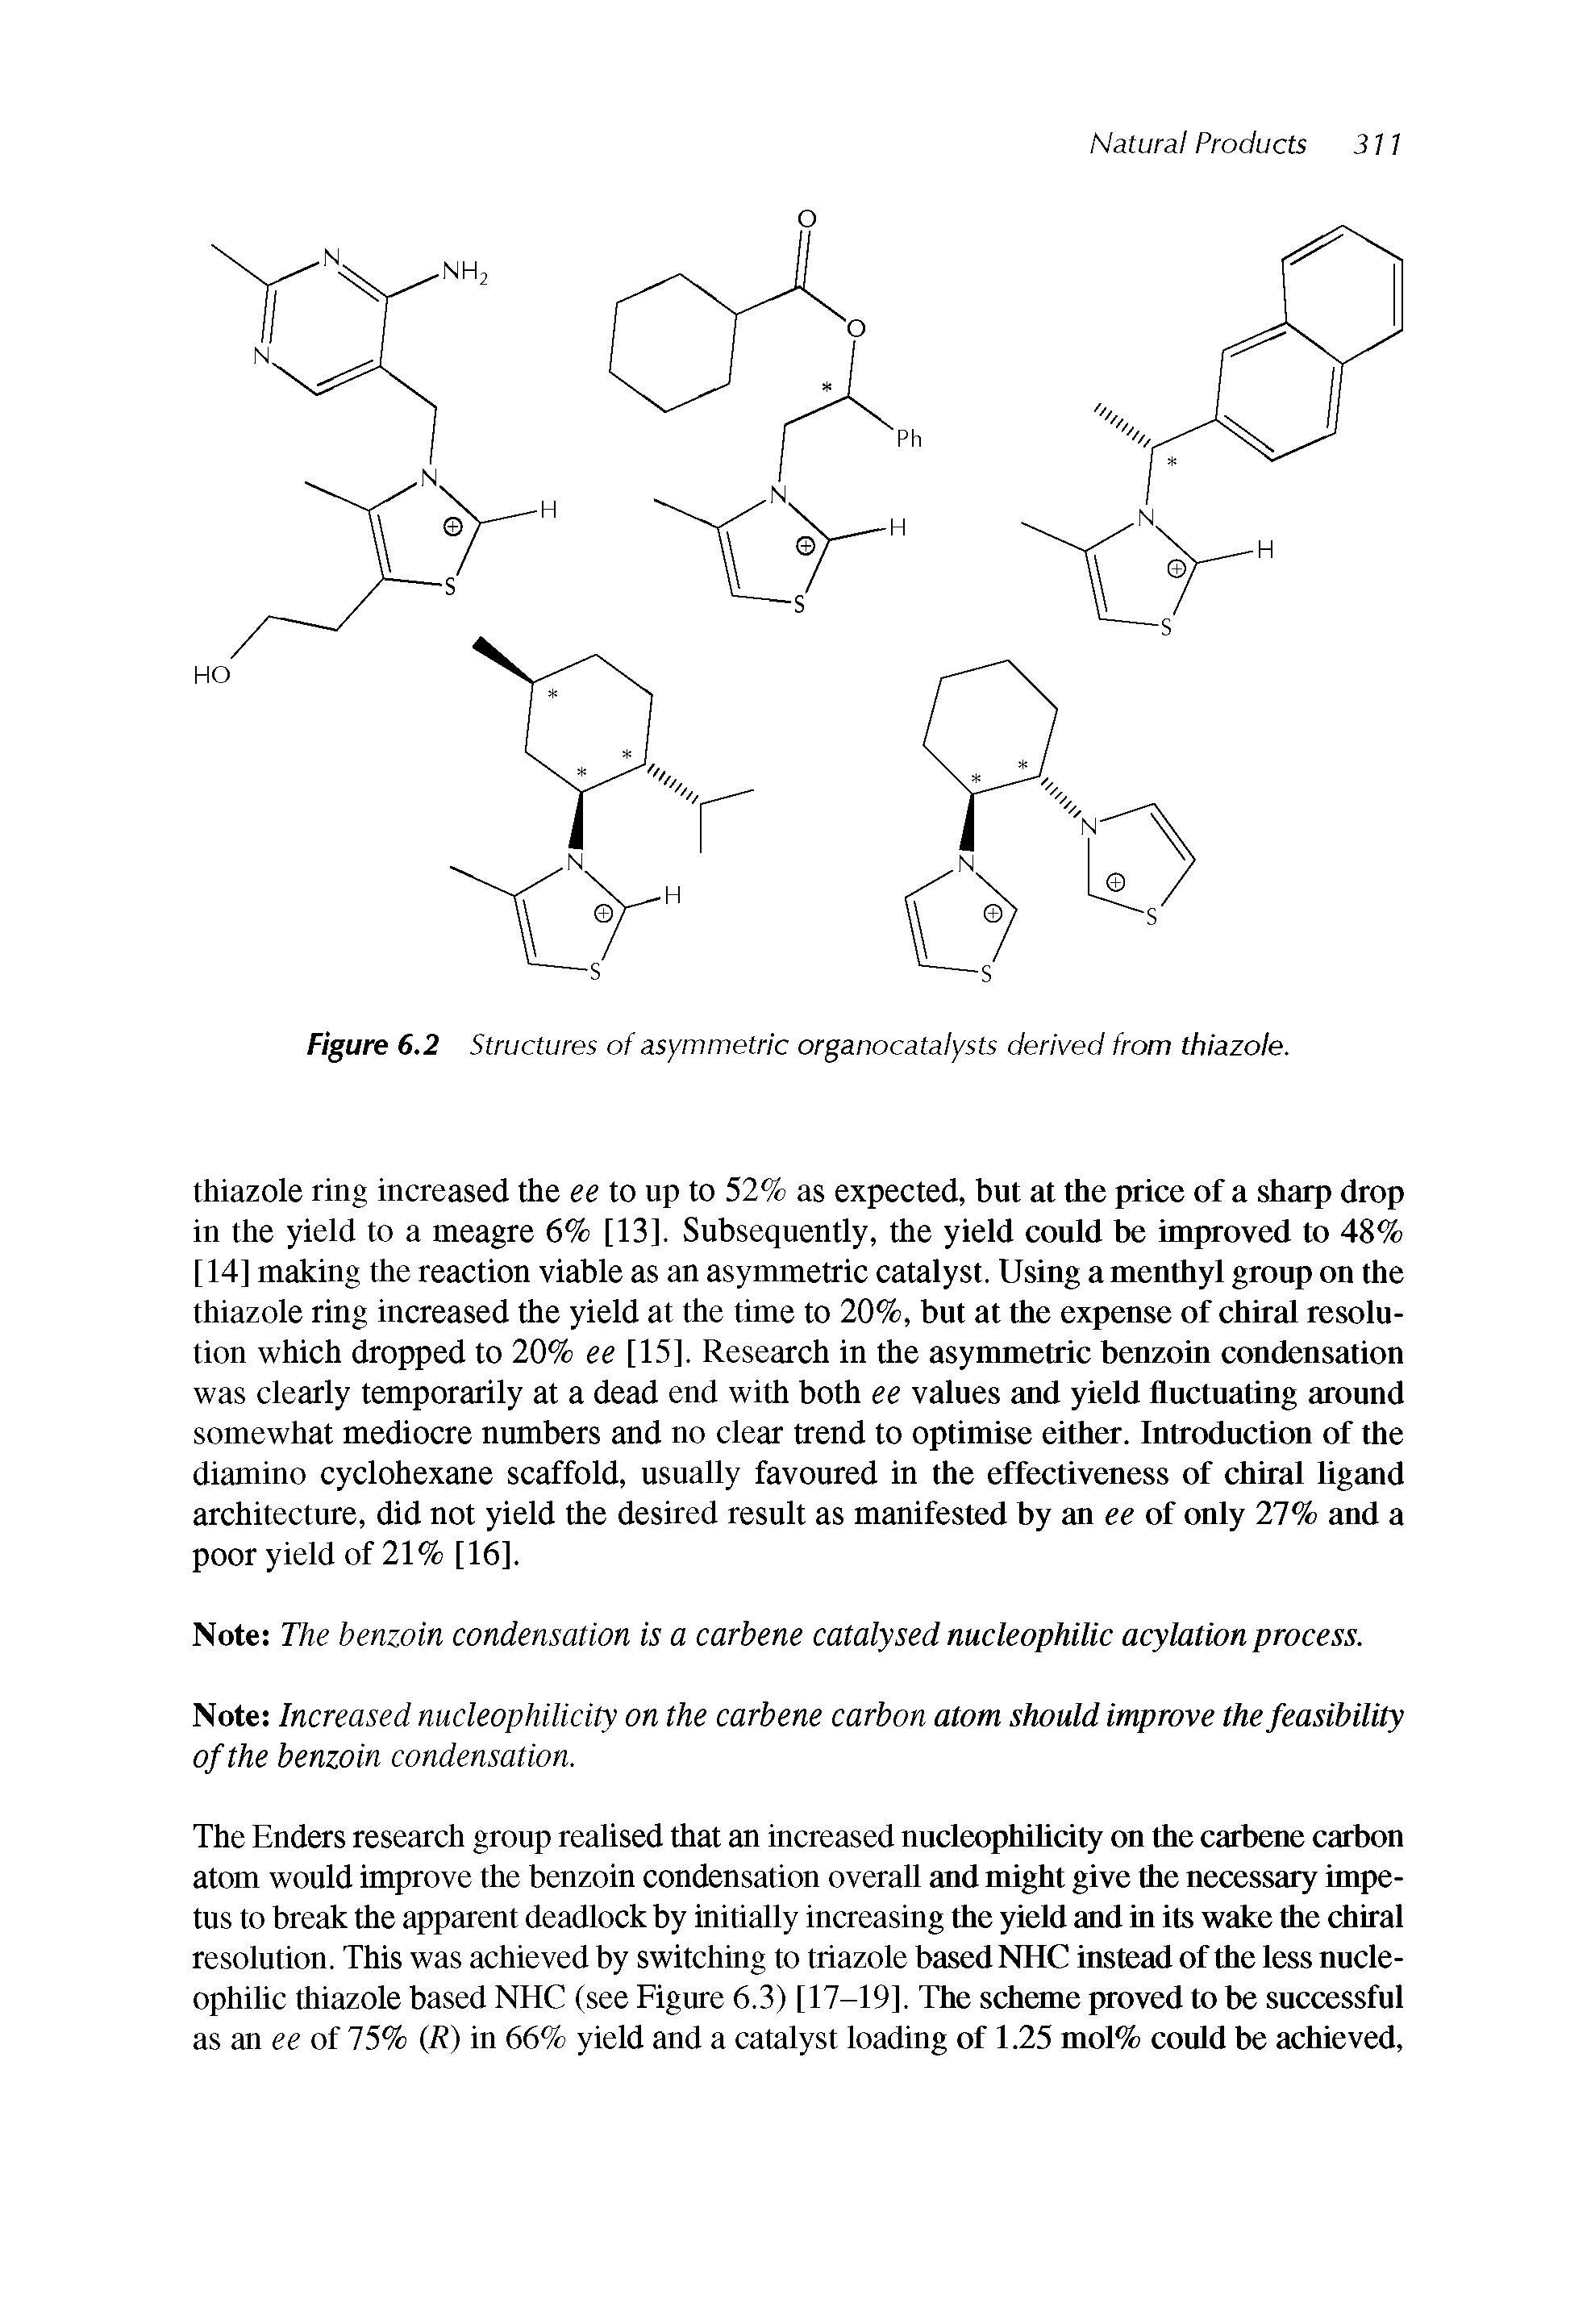 Figure 6.2 Structures of asymmetric organocatalysts derived from thiazole.